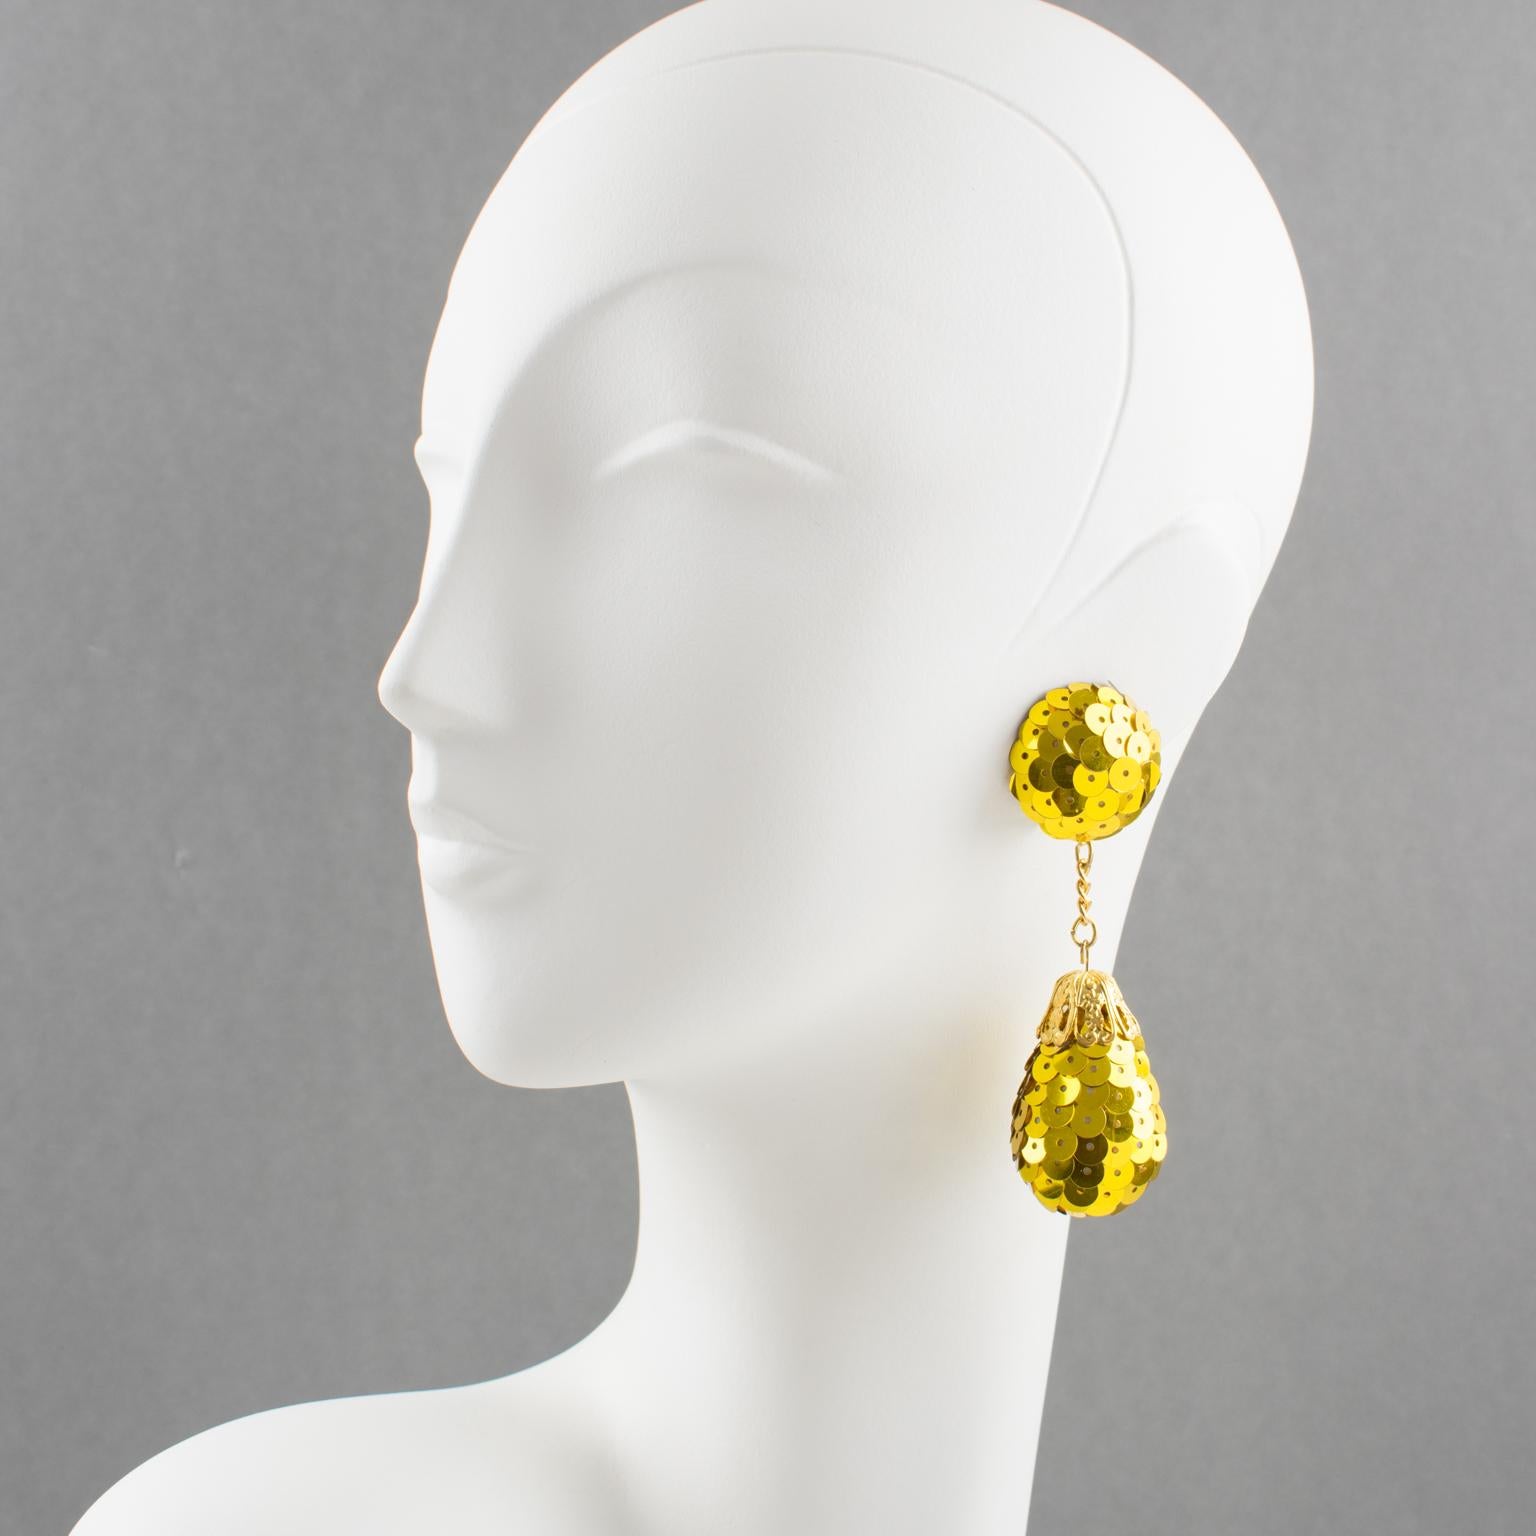 Funky disco chandelier clip-on earrings with a vintage look. They feature a dangling design covered with bright yellow glitter sequins in a large teardrop ball charm shape. There is no visible maker's mark.
Measurements: 3.57 in. long (9 cm) x 1 in.